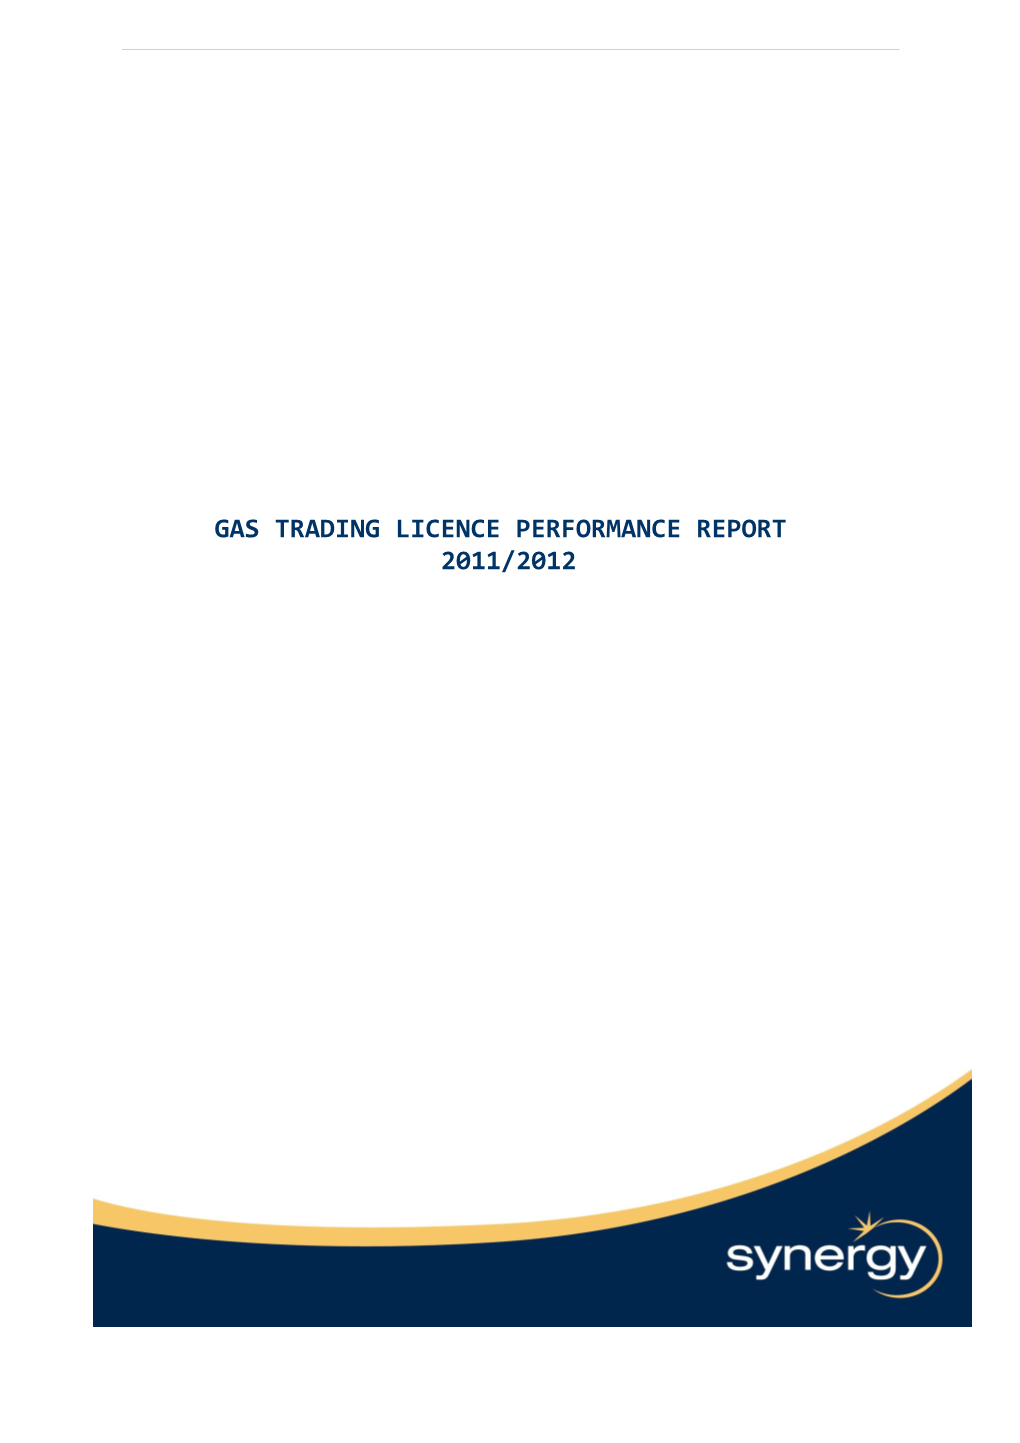 Gas Trading Licence Performance Report 2009/2010